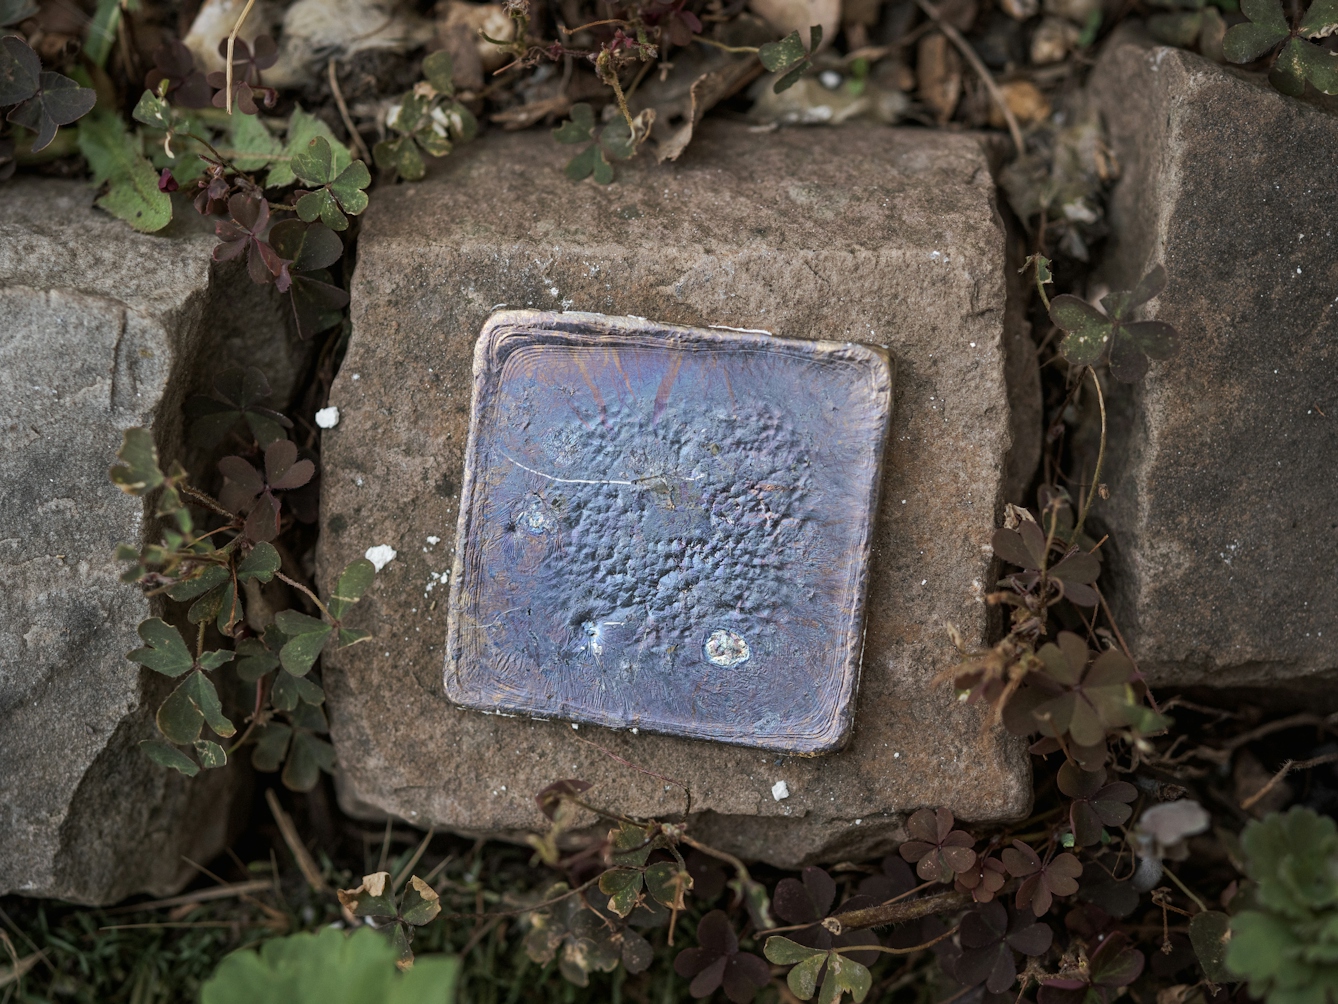 Photograph of a lead plate cooling on a stone.  The lead shows signs of lead oxide on the surface, giving off blue and purple colouring.